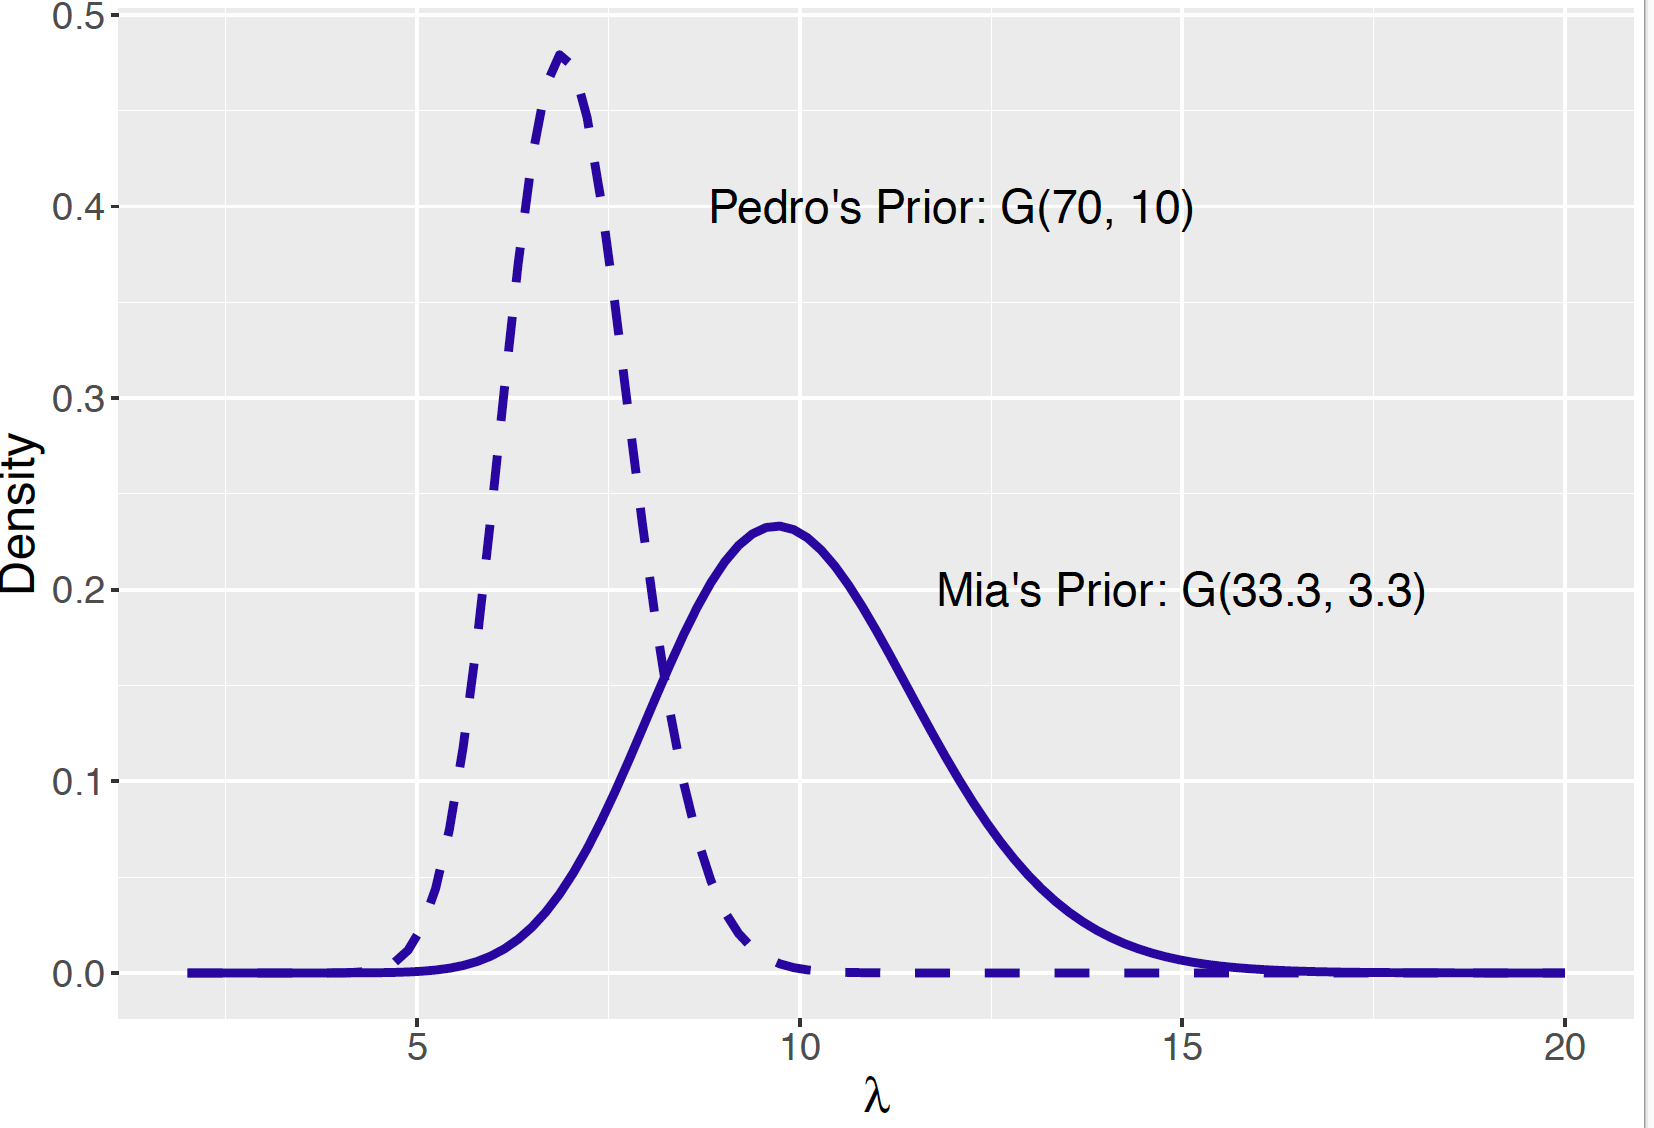 Two Gamma priors for the average number of visits to ER during a particular hour in the evening.